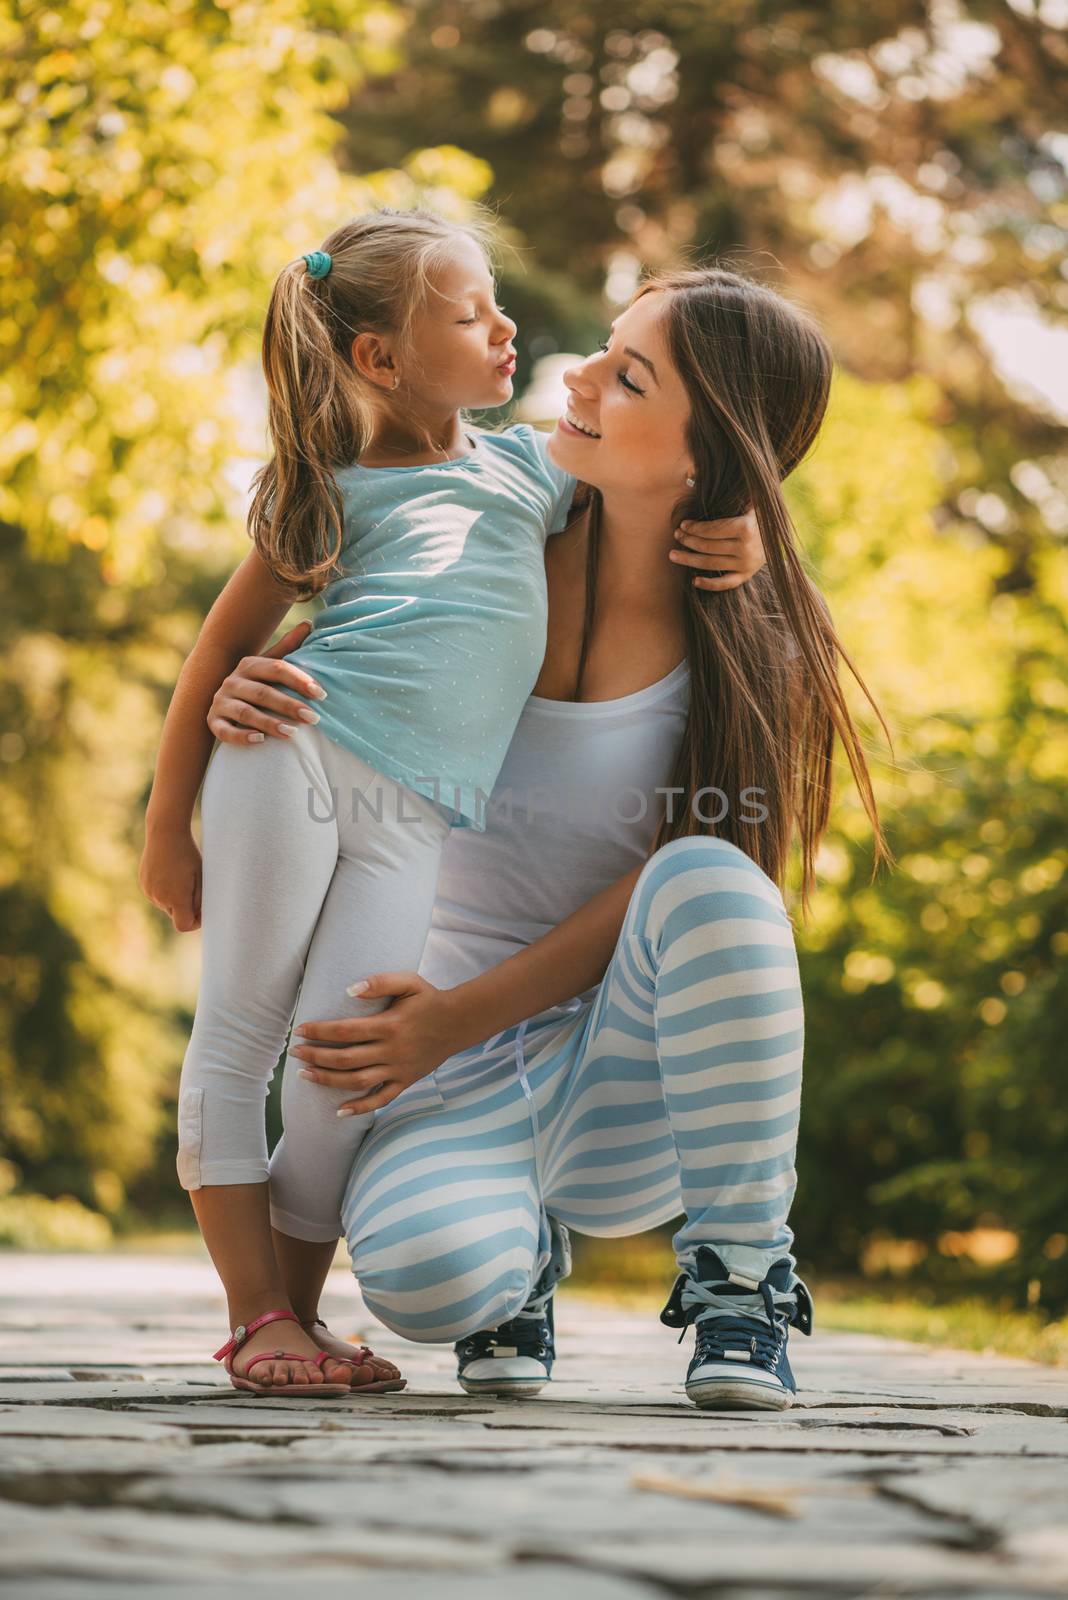 Beautiful mother and daughter posing at the park in spring day.